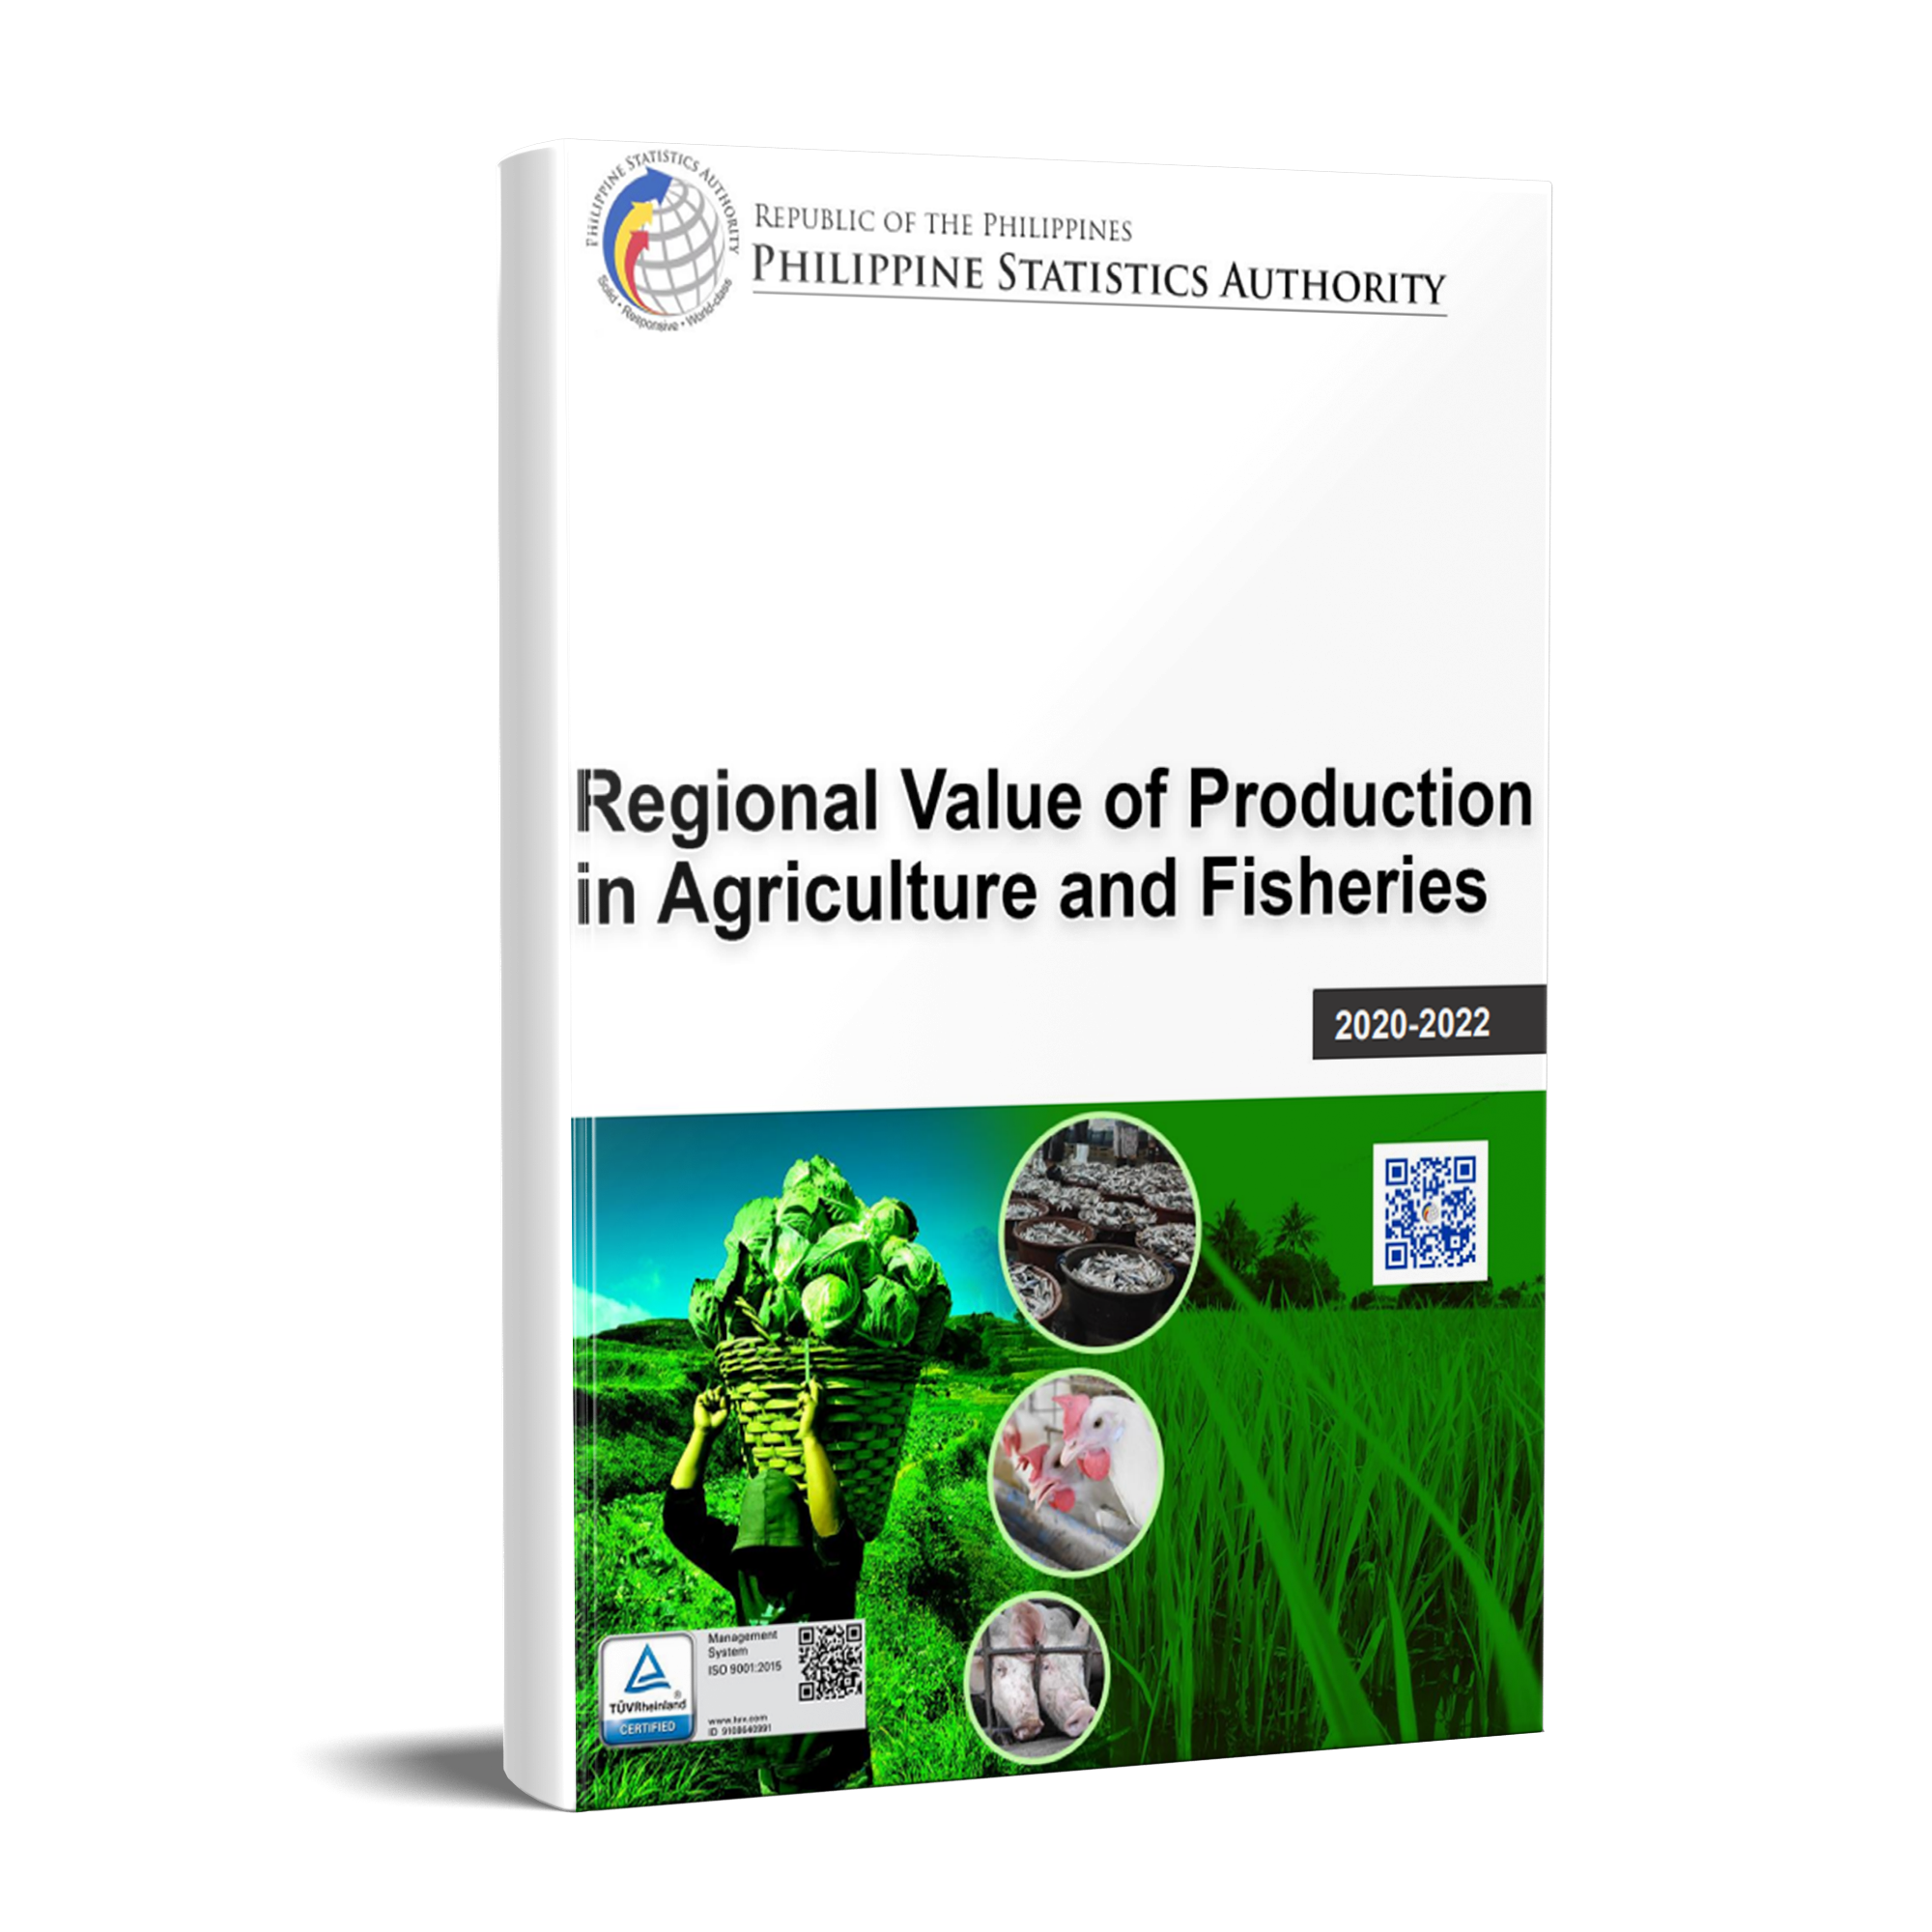 Regional Value of Production in Agriculture and Fisheries